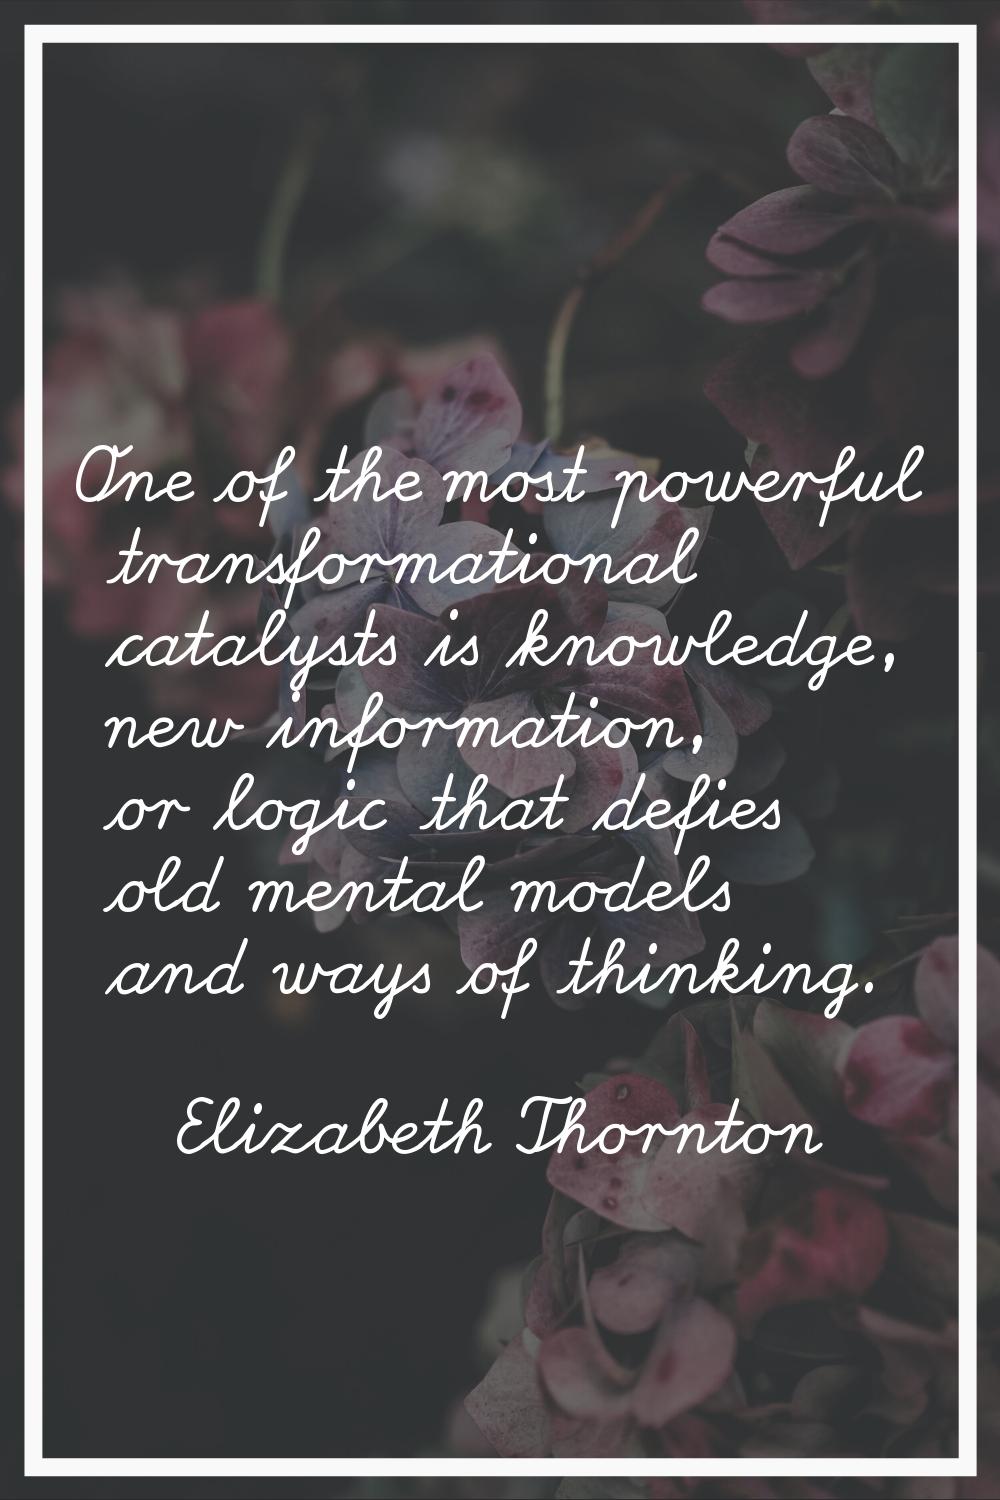 One of the most powerful transformational catalysts is knowledge, new information, or logic that de